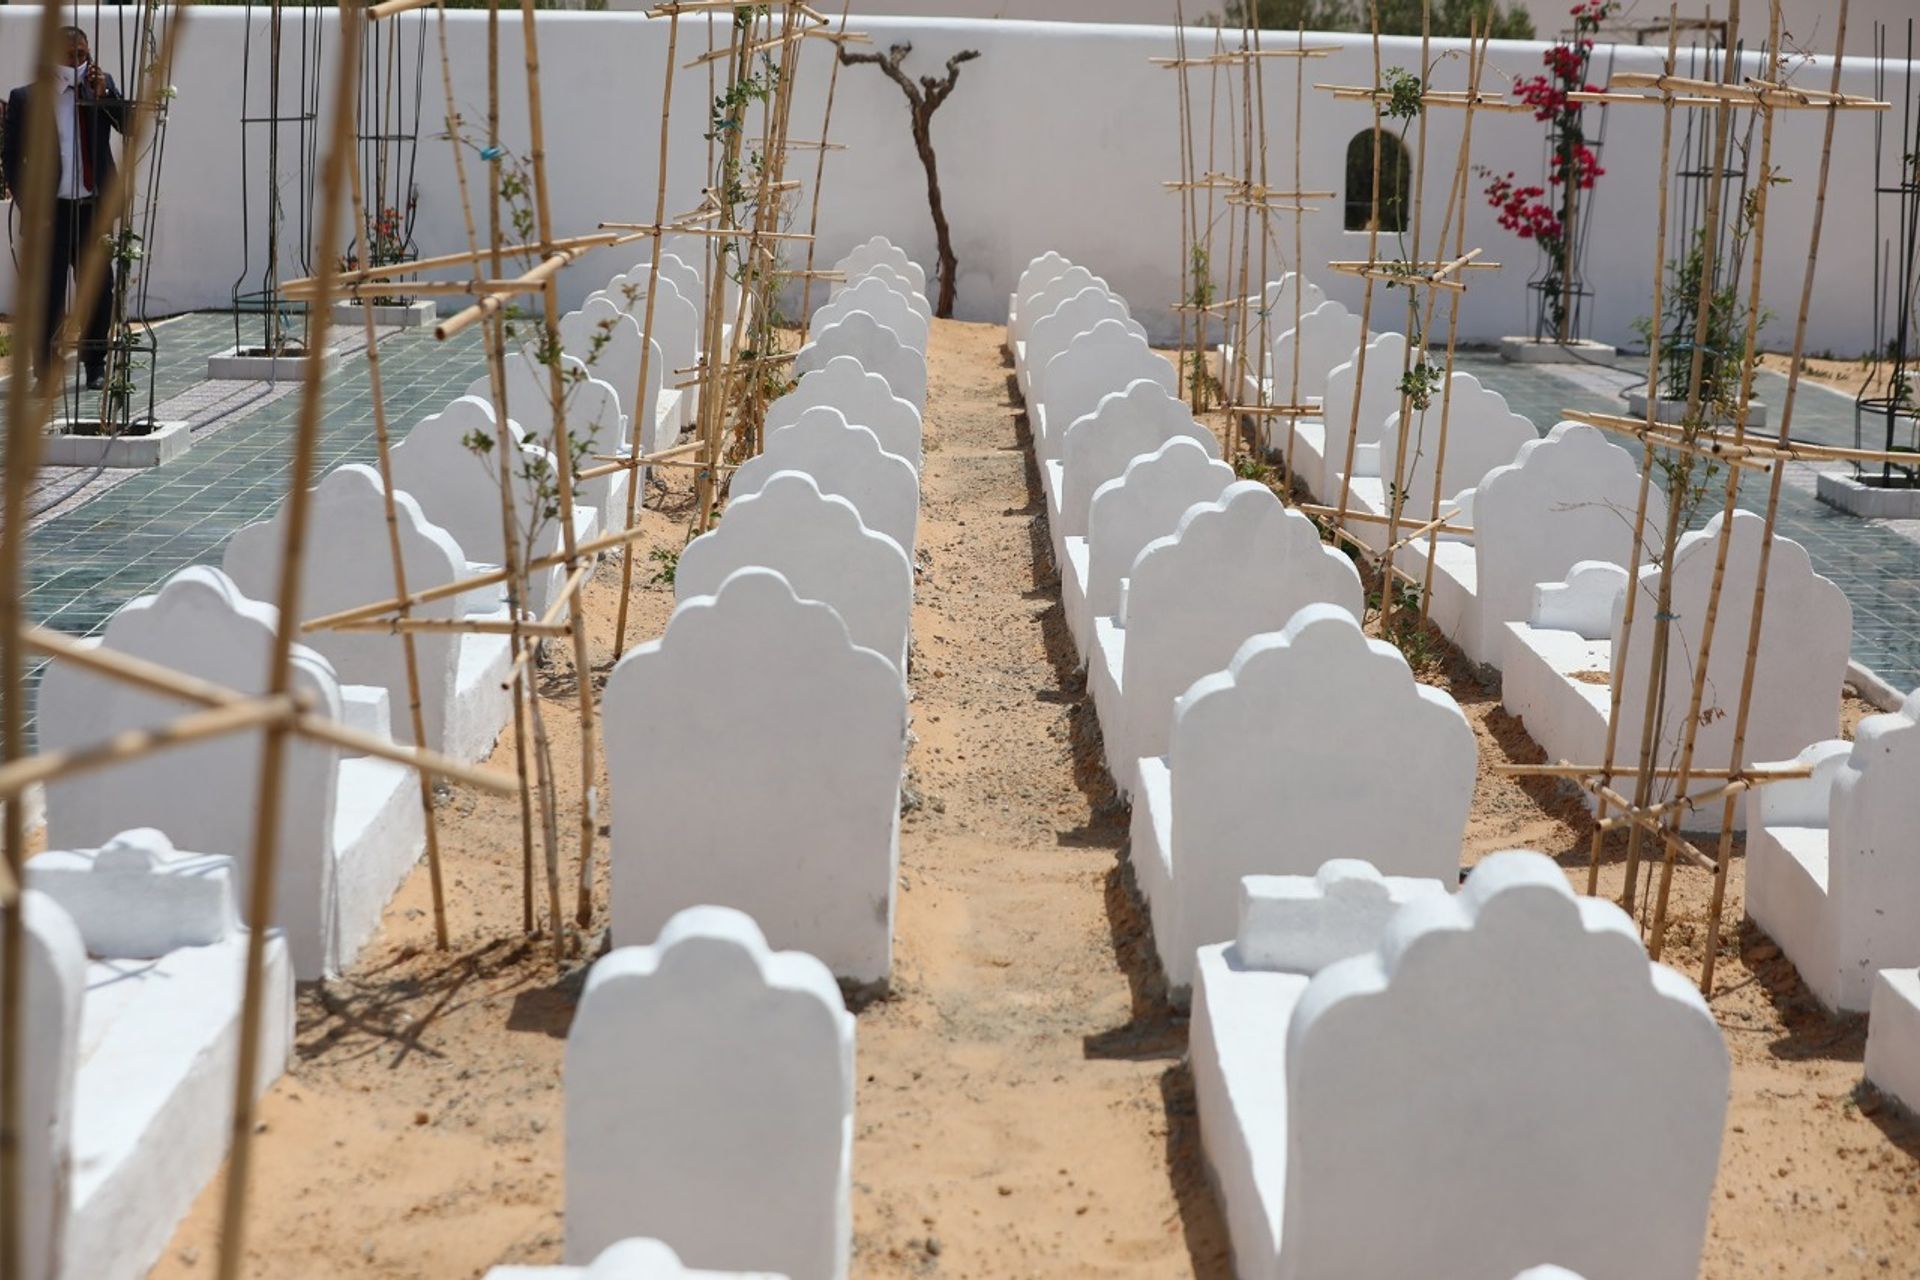 Le Jardin d’Afrique in Zarzis, Tunisia, is partly intended as a rebuke of global authorities that seem indifferent to migrant deaths Courtesy of Rachid Koraïchi